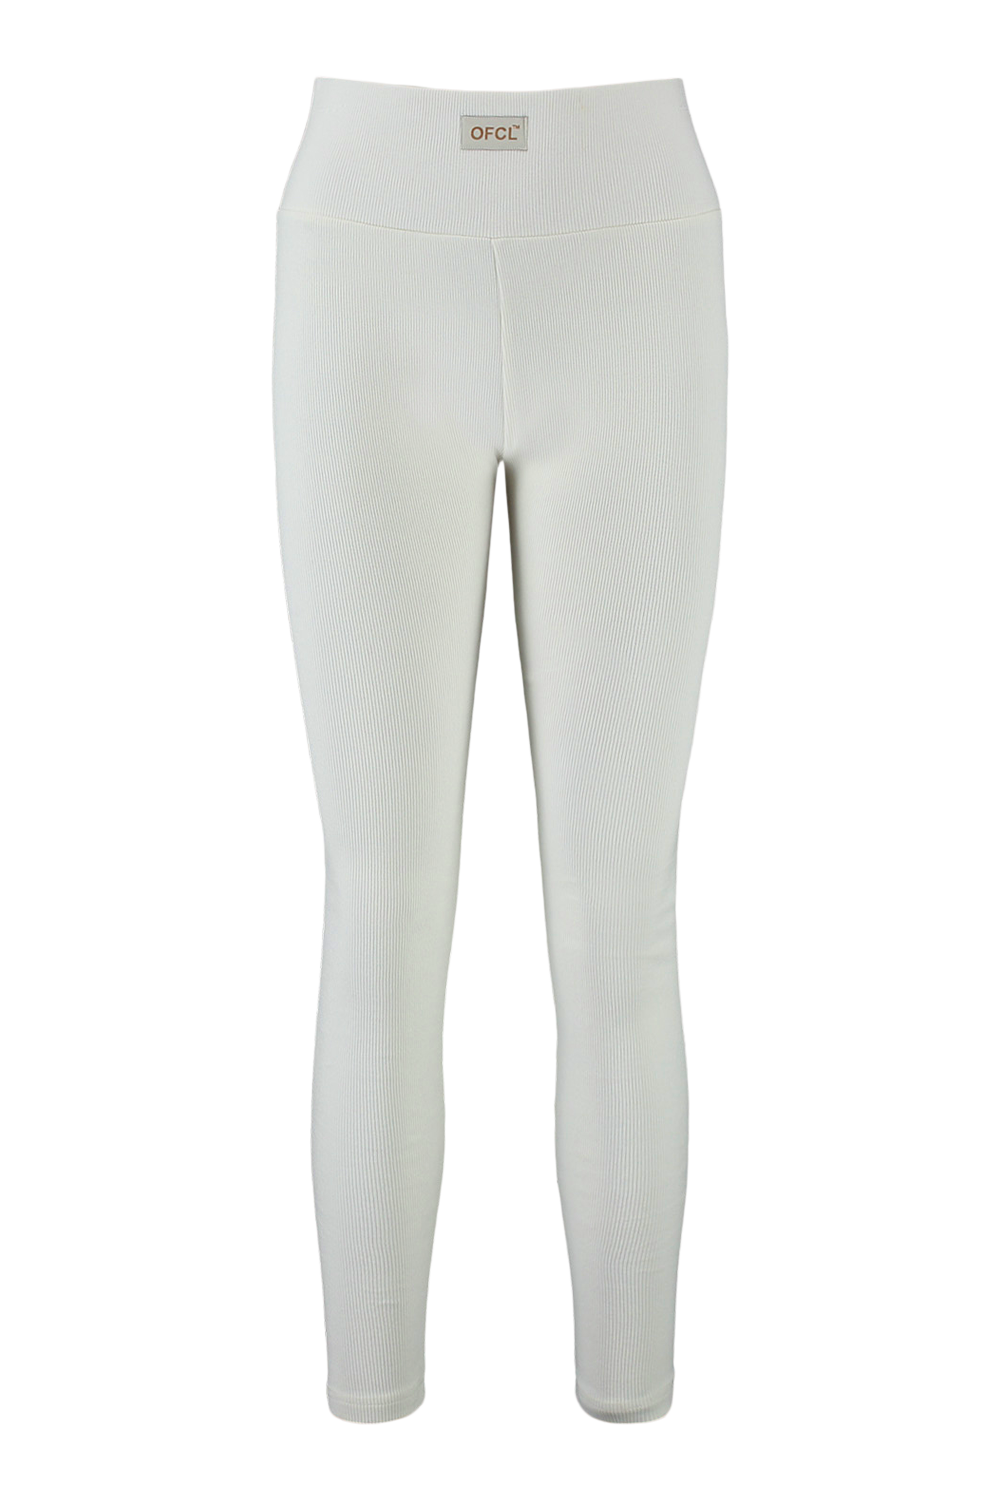 Ofcl Ribbed Workout Leggings